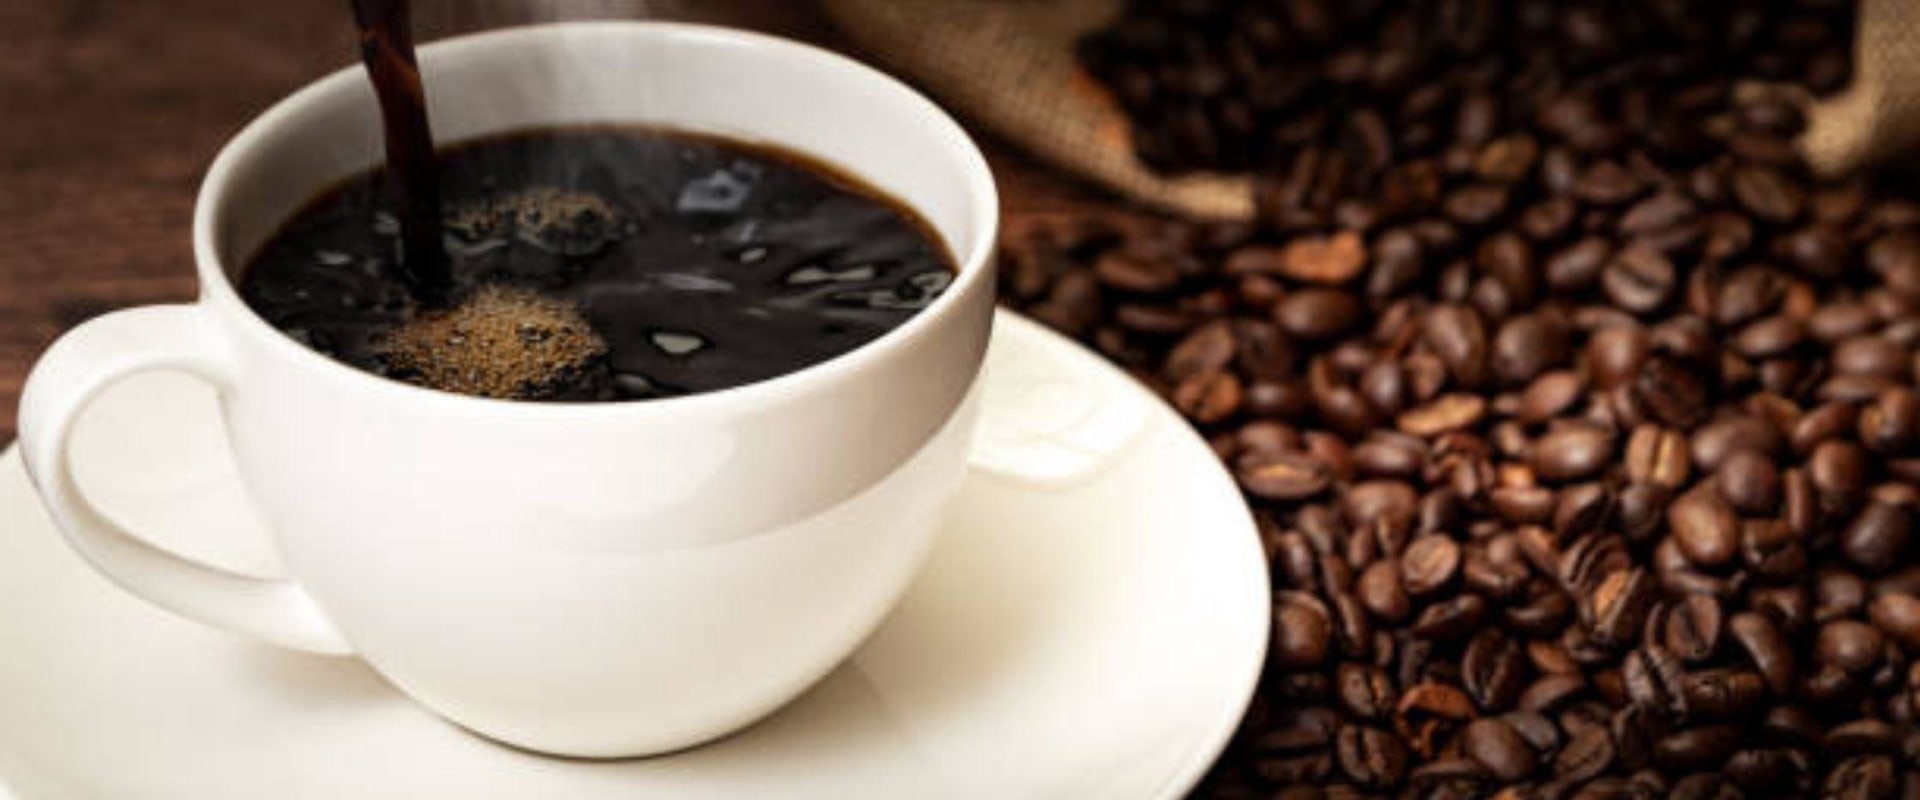 What are the Benefits and Disadvantages of Drinking Coffee?